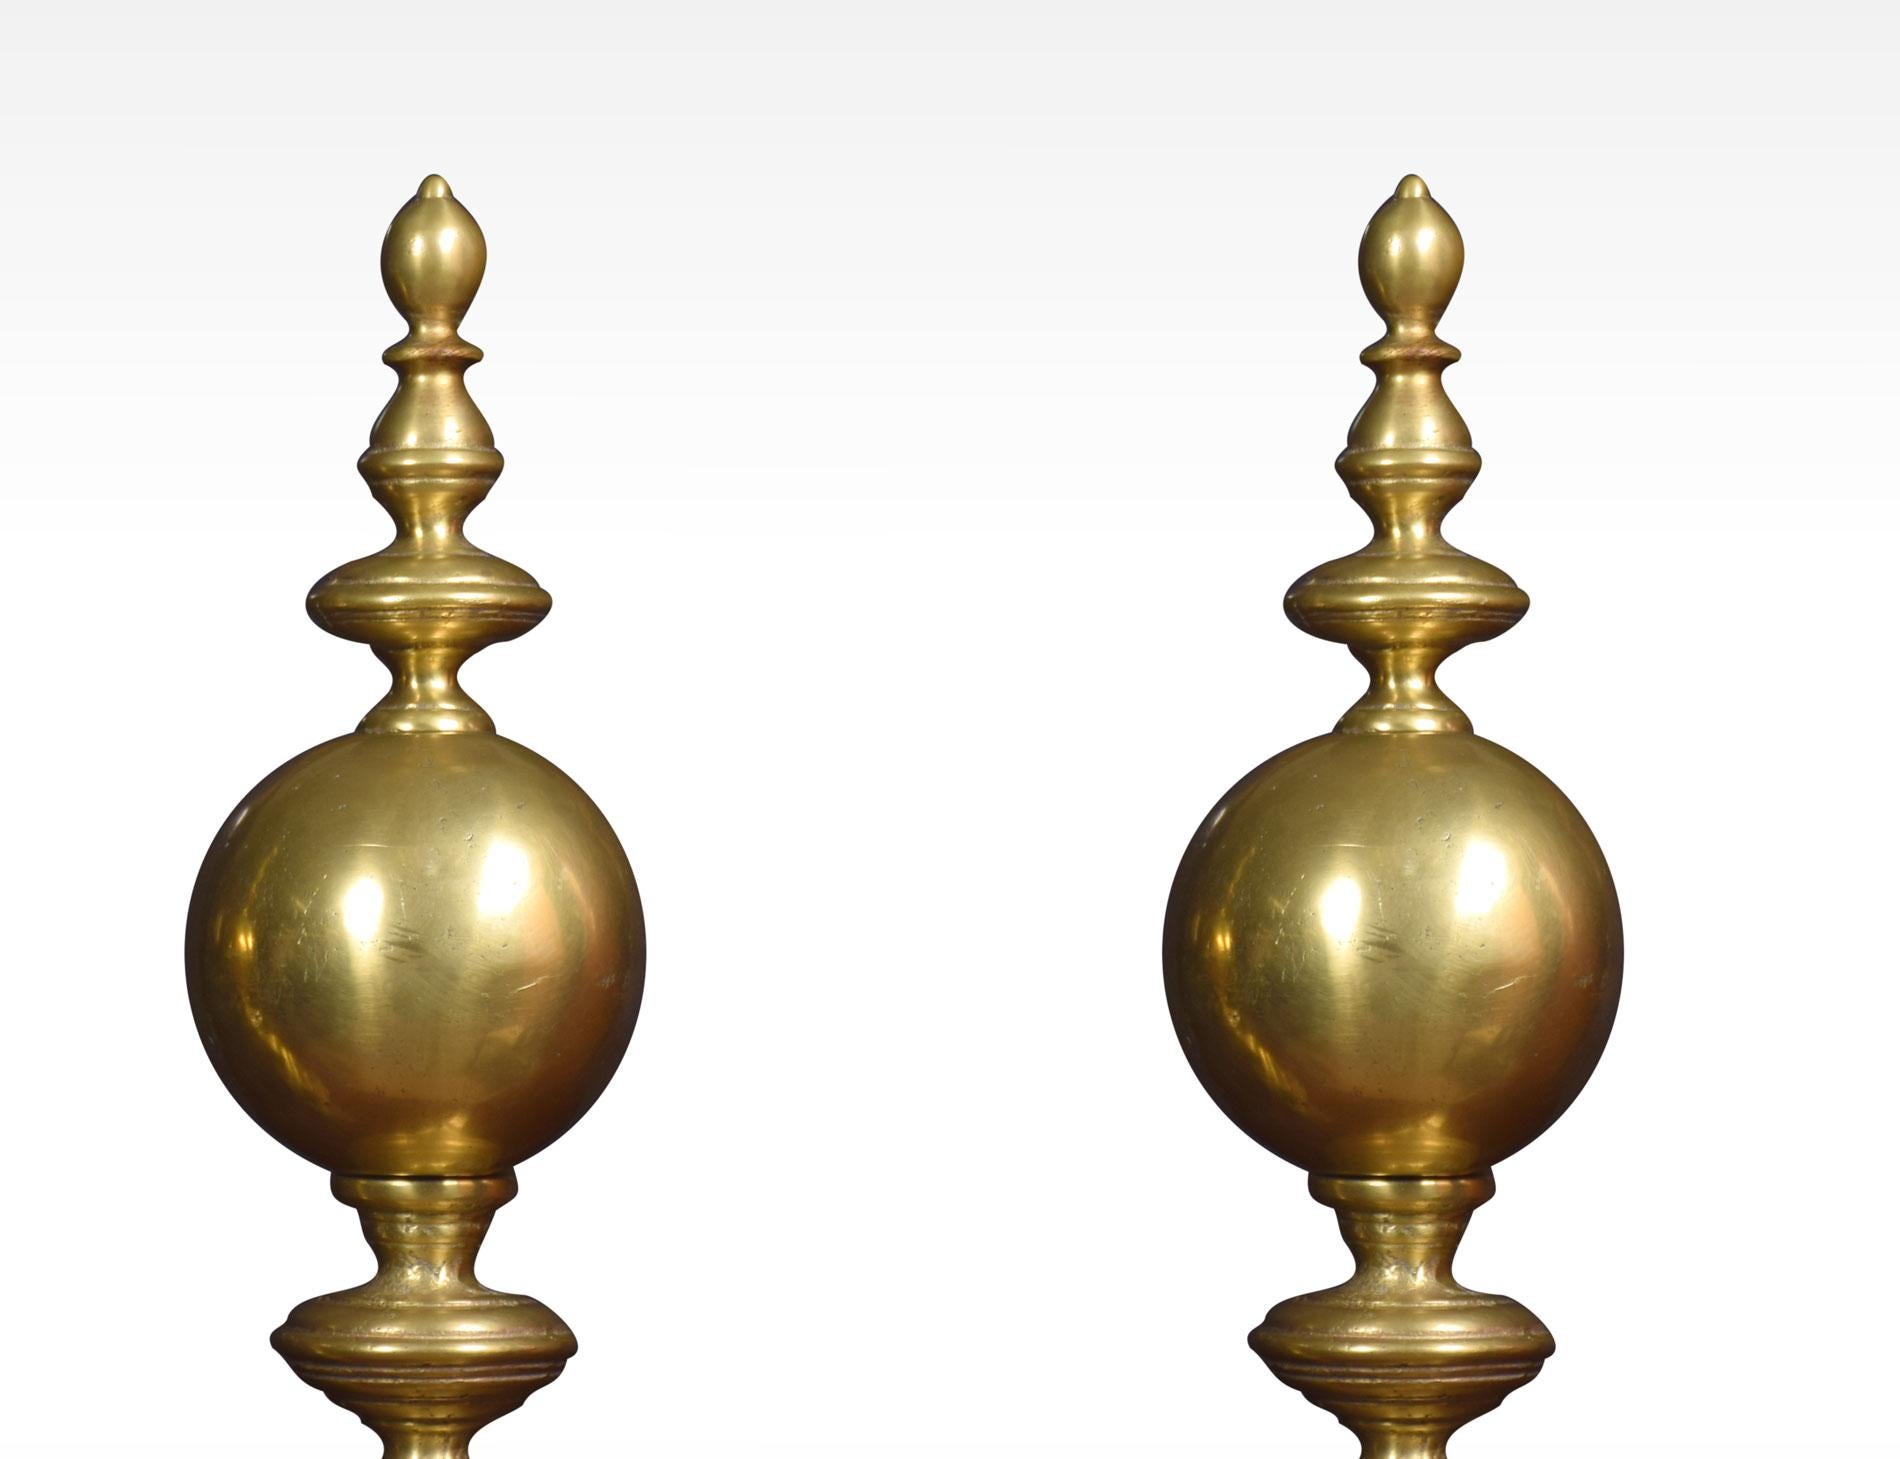 Pair of Dutch Baroque style brass fire dogs the ball uprights with finials on bases cast with flowerheads terminating in block feet.
Dimensions:
Height 20 inches
Width 7 inches
Depth 14.5 inches.